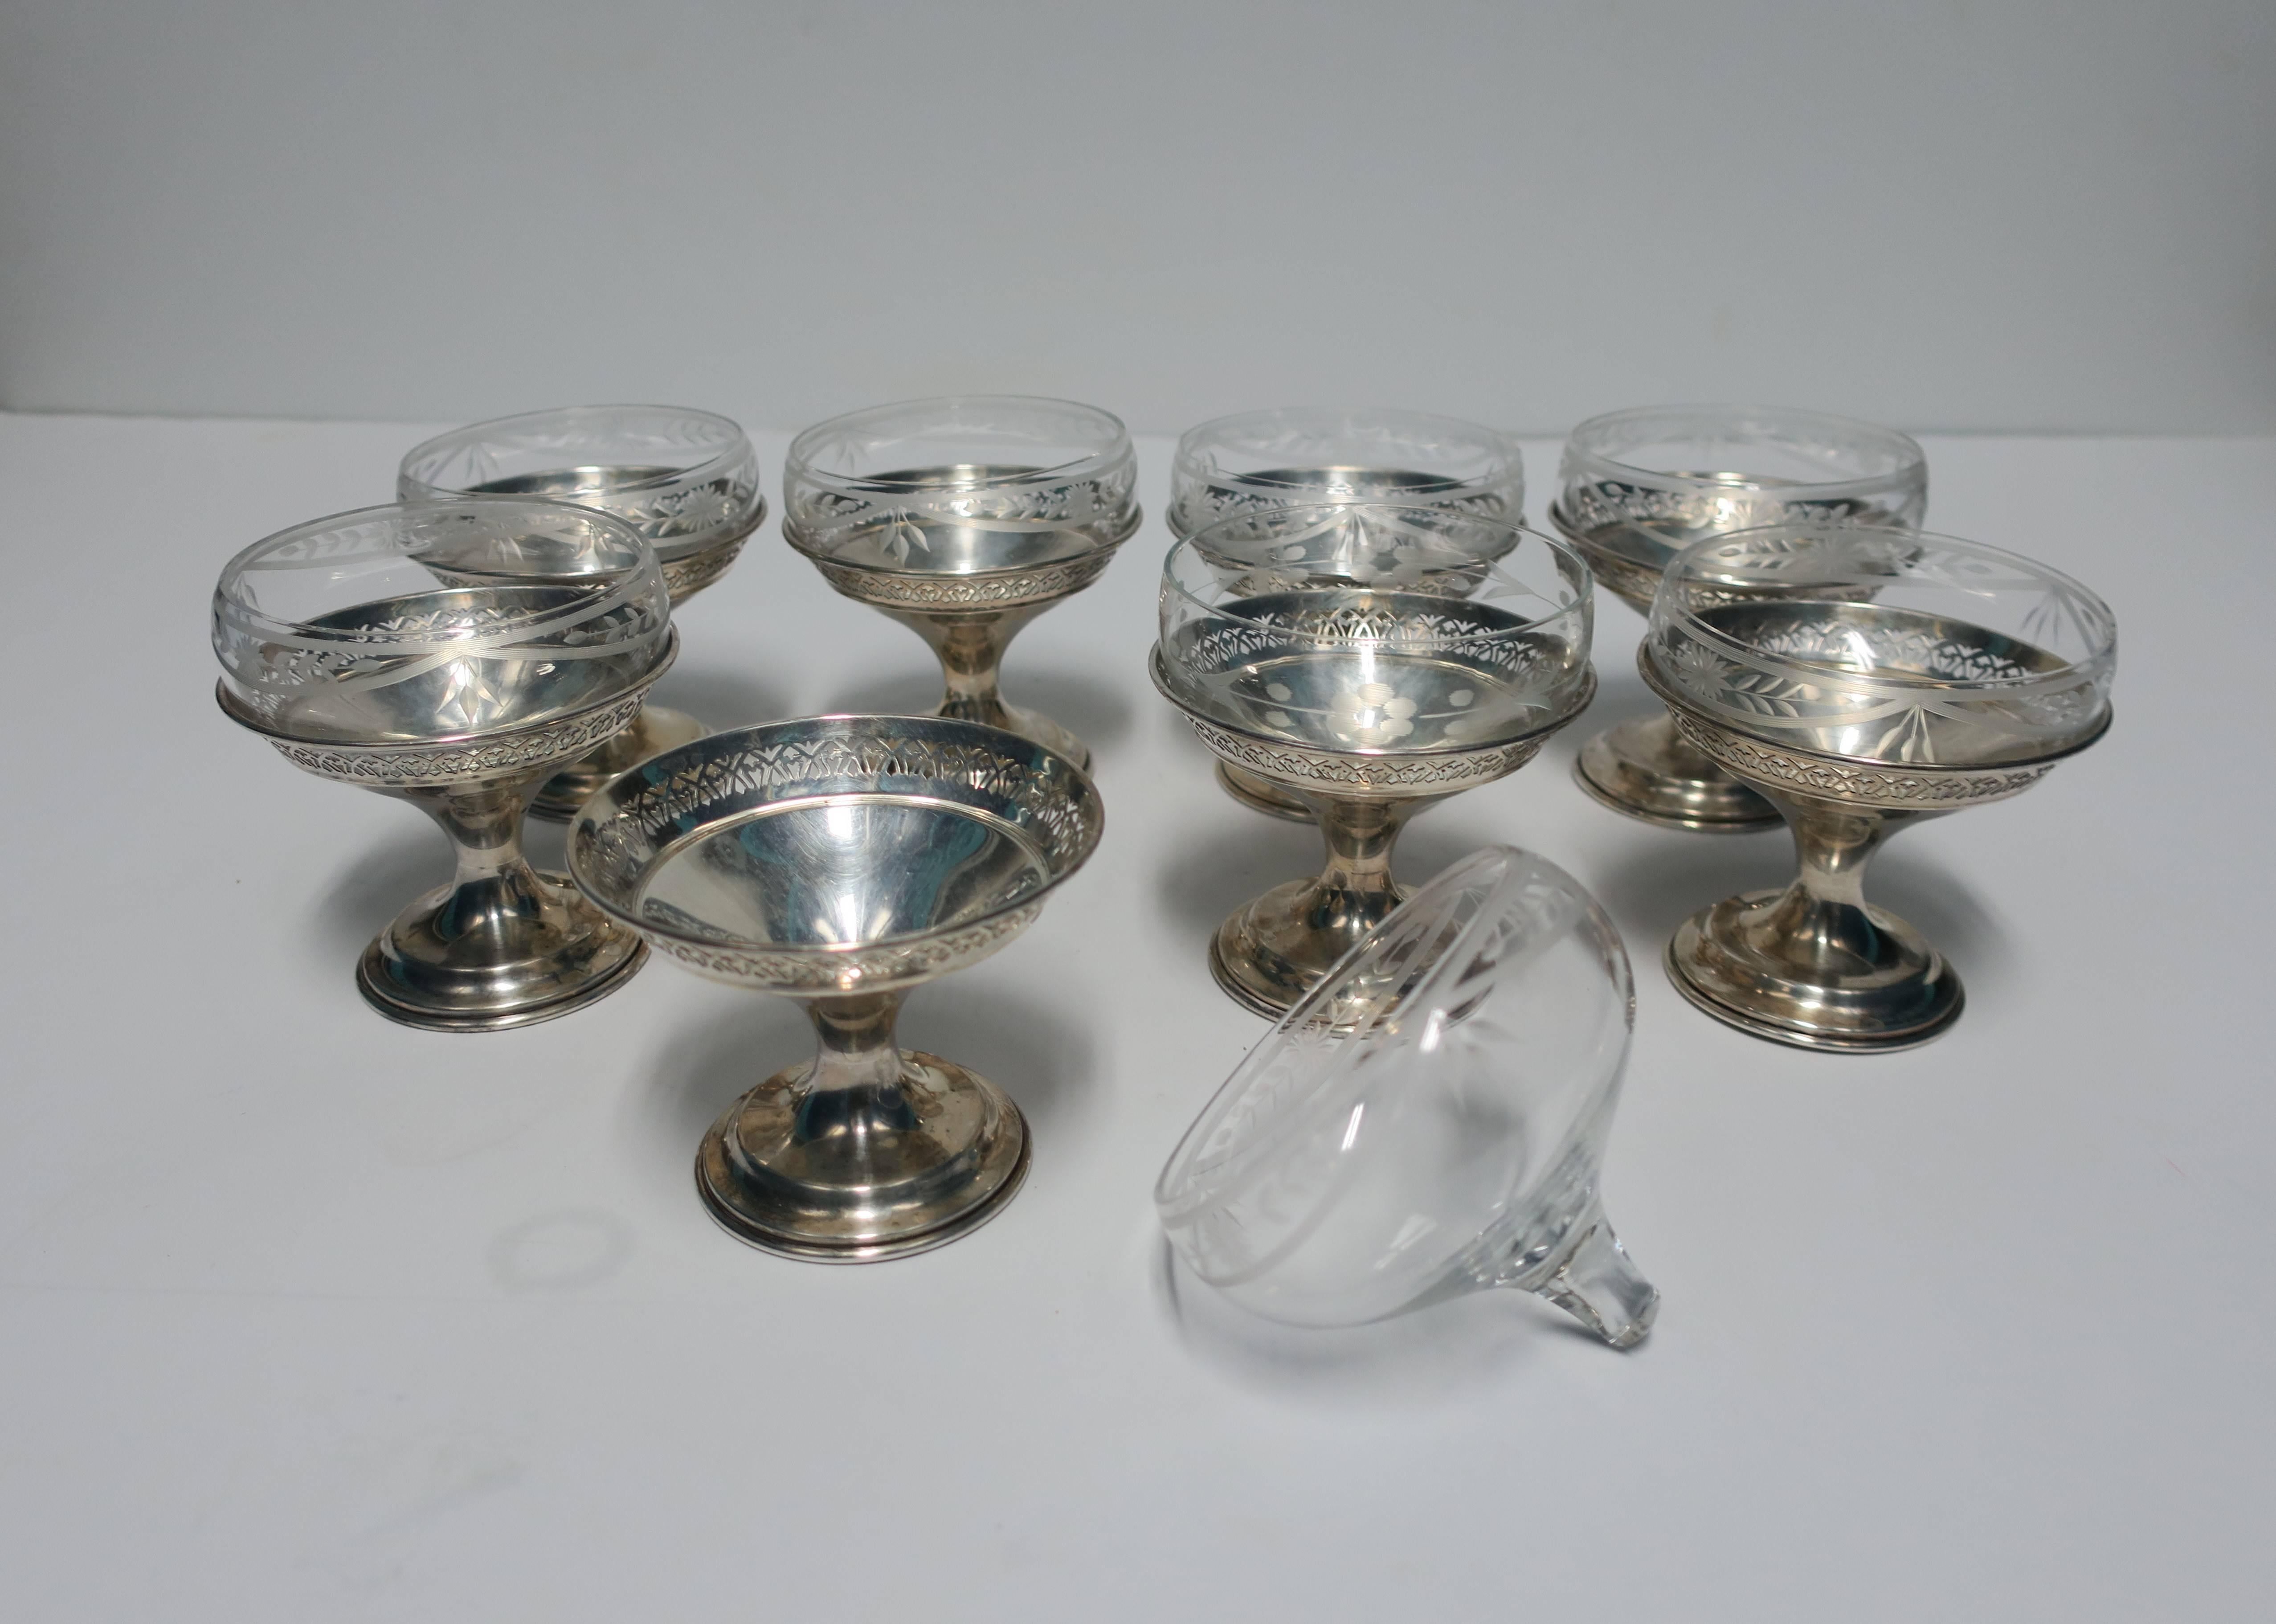 20th Century Set of 8 Sterling Silver & Crystal Champagne Coup or Dessert Glasses 